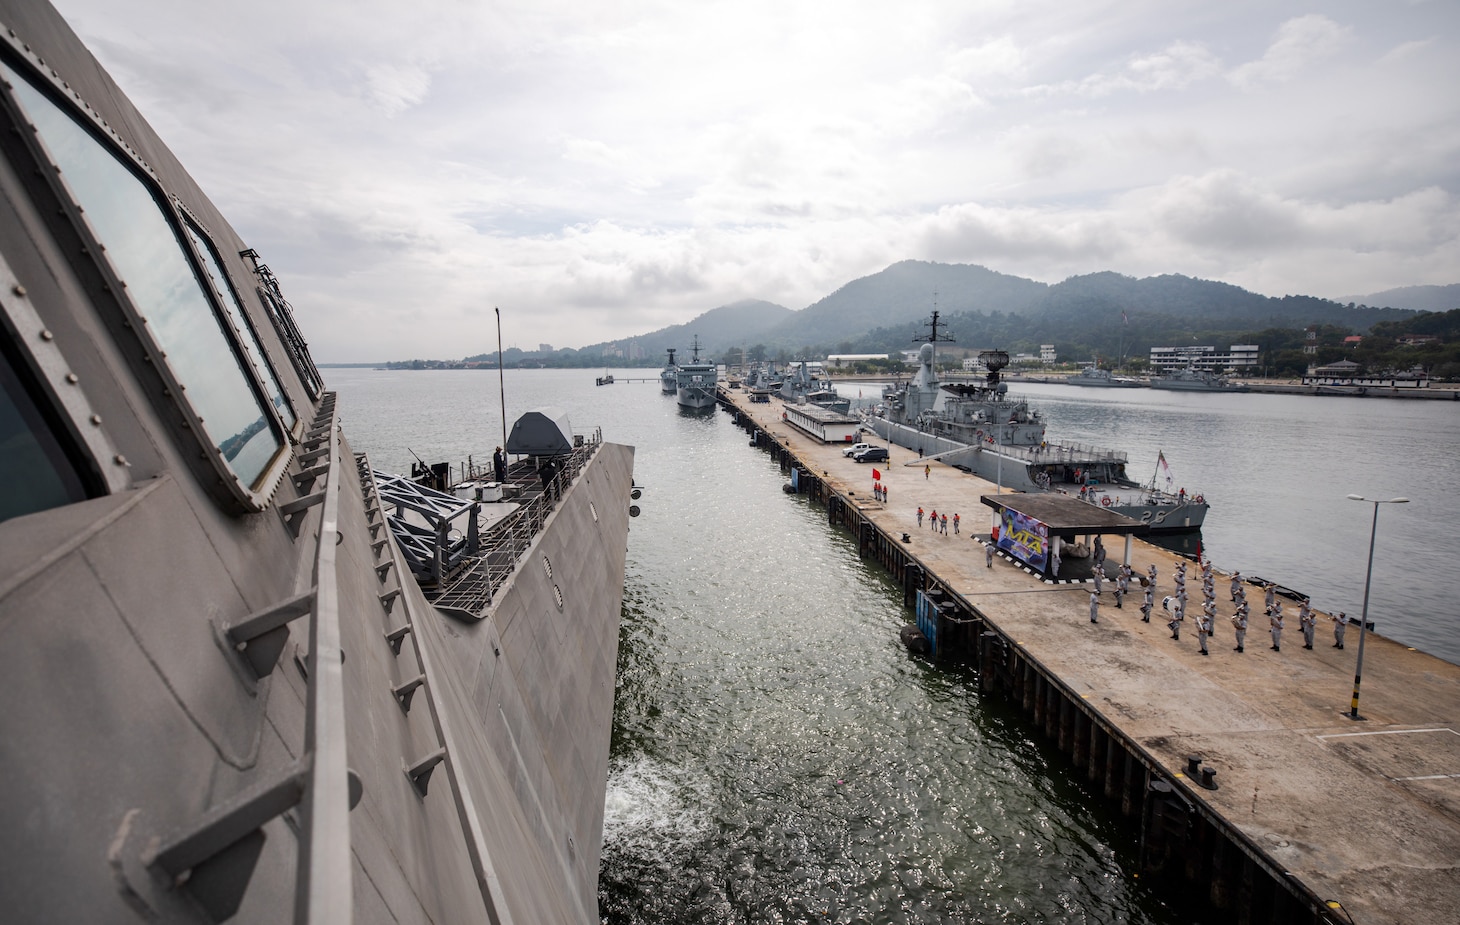 211129-N-LI768-1141 LUMUT, Malaysia (Nov. 29, 2021) - The Independence-variant littoral combat ship USS Tulsa (LCS 16) arrives at Lumut, Malaysia, following Maritime Training Activity (MTA) Malaysia 2021. MTA Malaysia 2021 is a continuation of 27 years of maritime engagements between the U.S. Navy and Royal Malaysian Navy serving to enhance mutual capabilities in ensuring maritime security and stability. Tulsa, part of Destroyer Squadron (DESRON) 7, is on a rotational deployment, operating in the U.S. 7th Fleet area of operations to enhance interoperability with partners and serve as a ready-response force in support of a free and open Indo-Pacific region. (U.S. Navy photo by Mass Communication Specialist 1st Class Devin M. Langer)